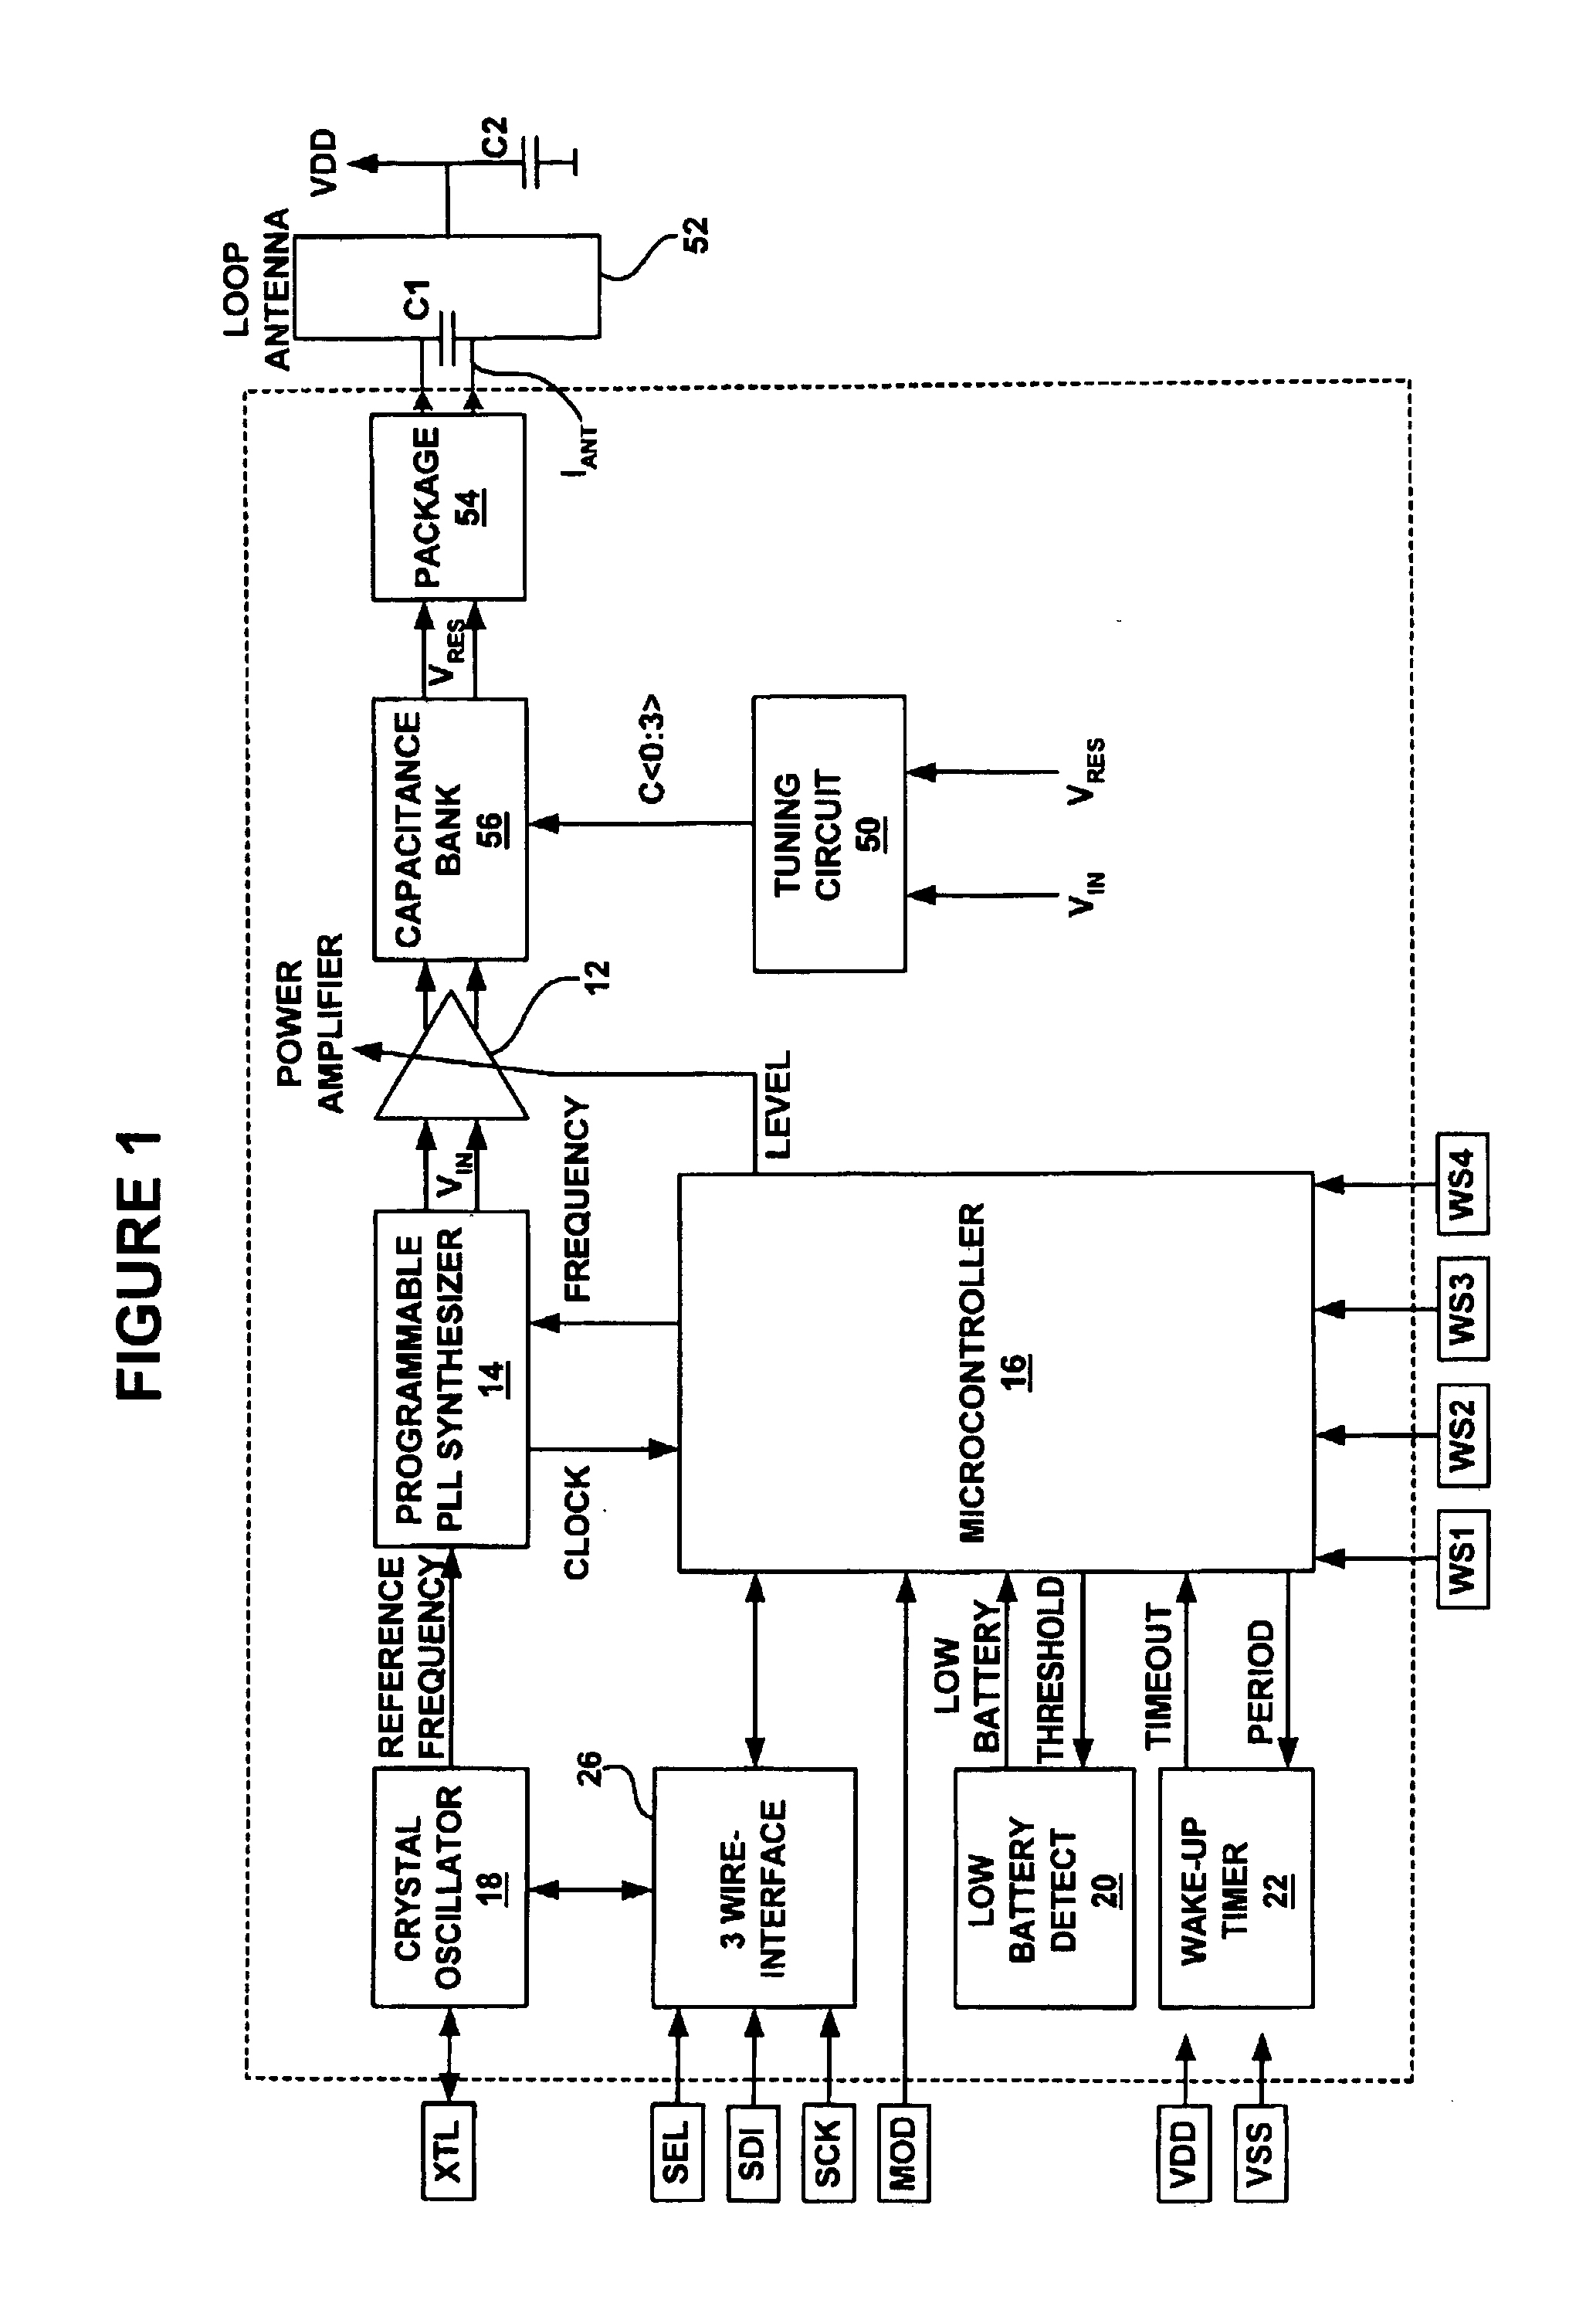 Method and apparatus for automatic tuning of a resonant loop antenna in a transceiver circuit